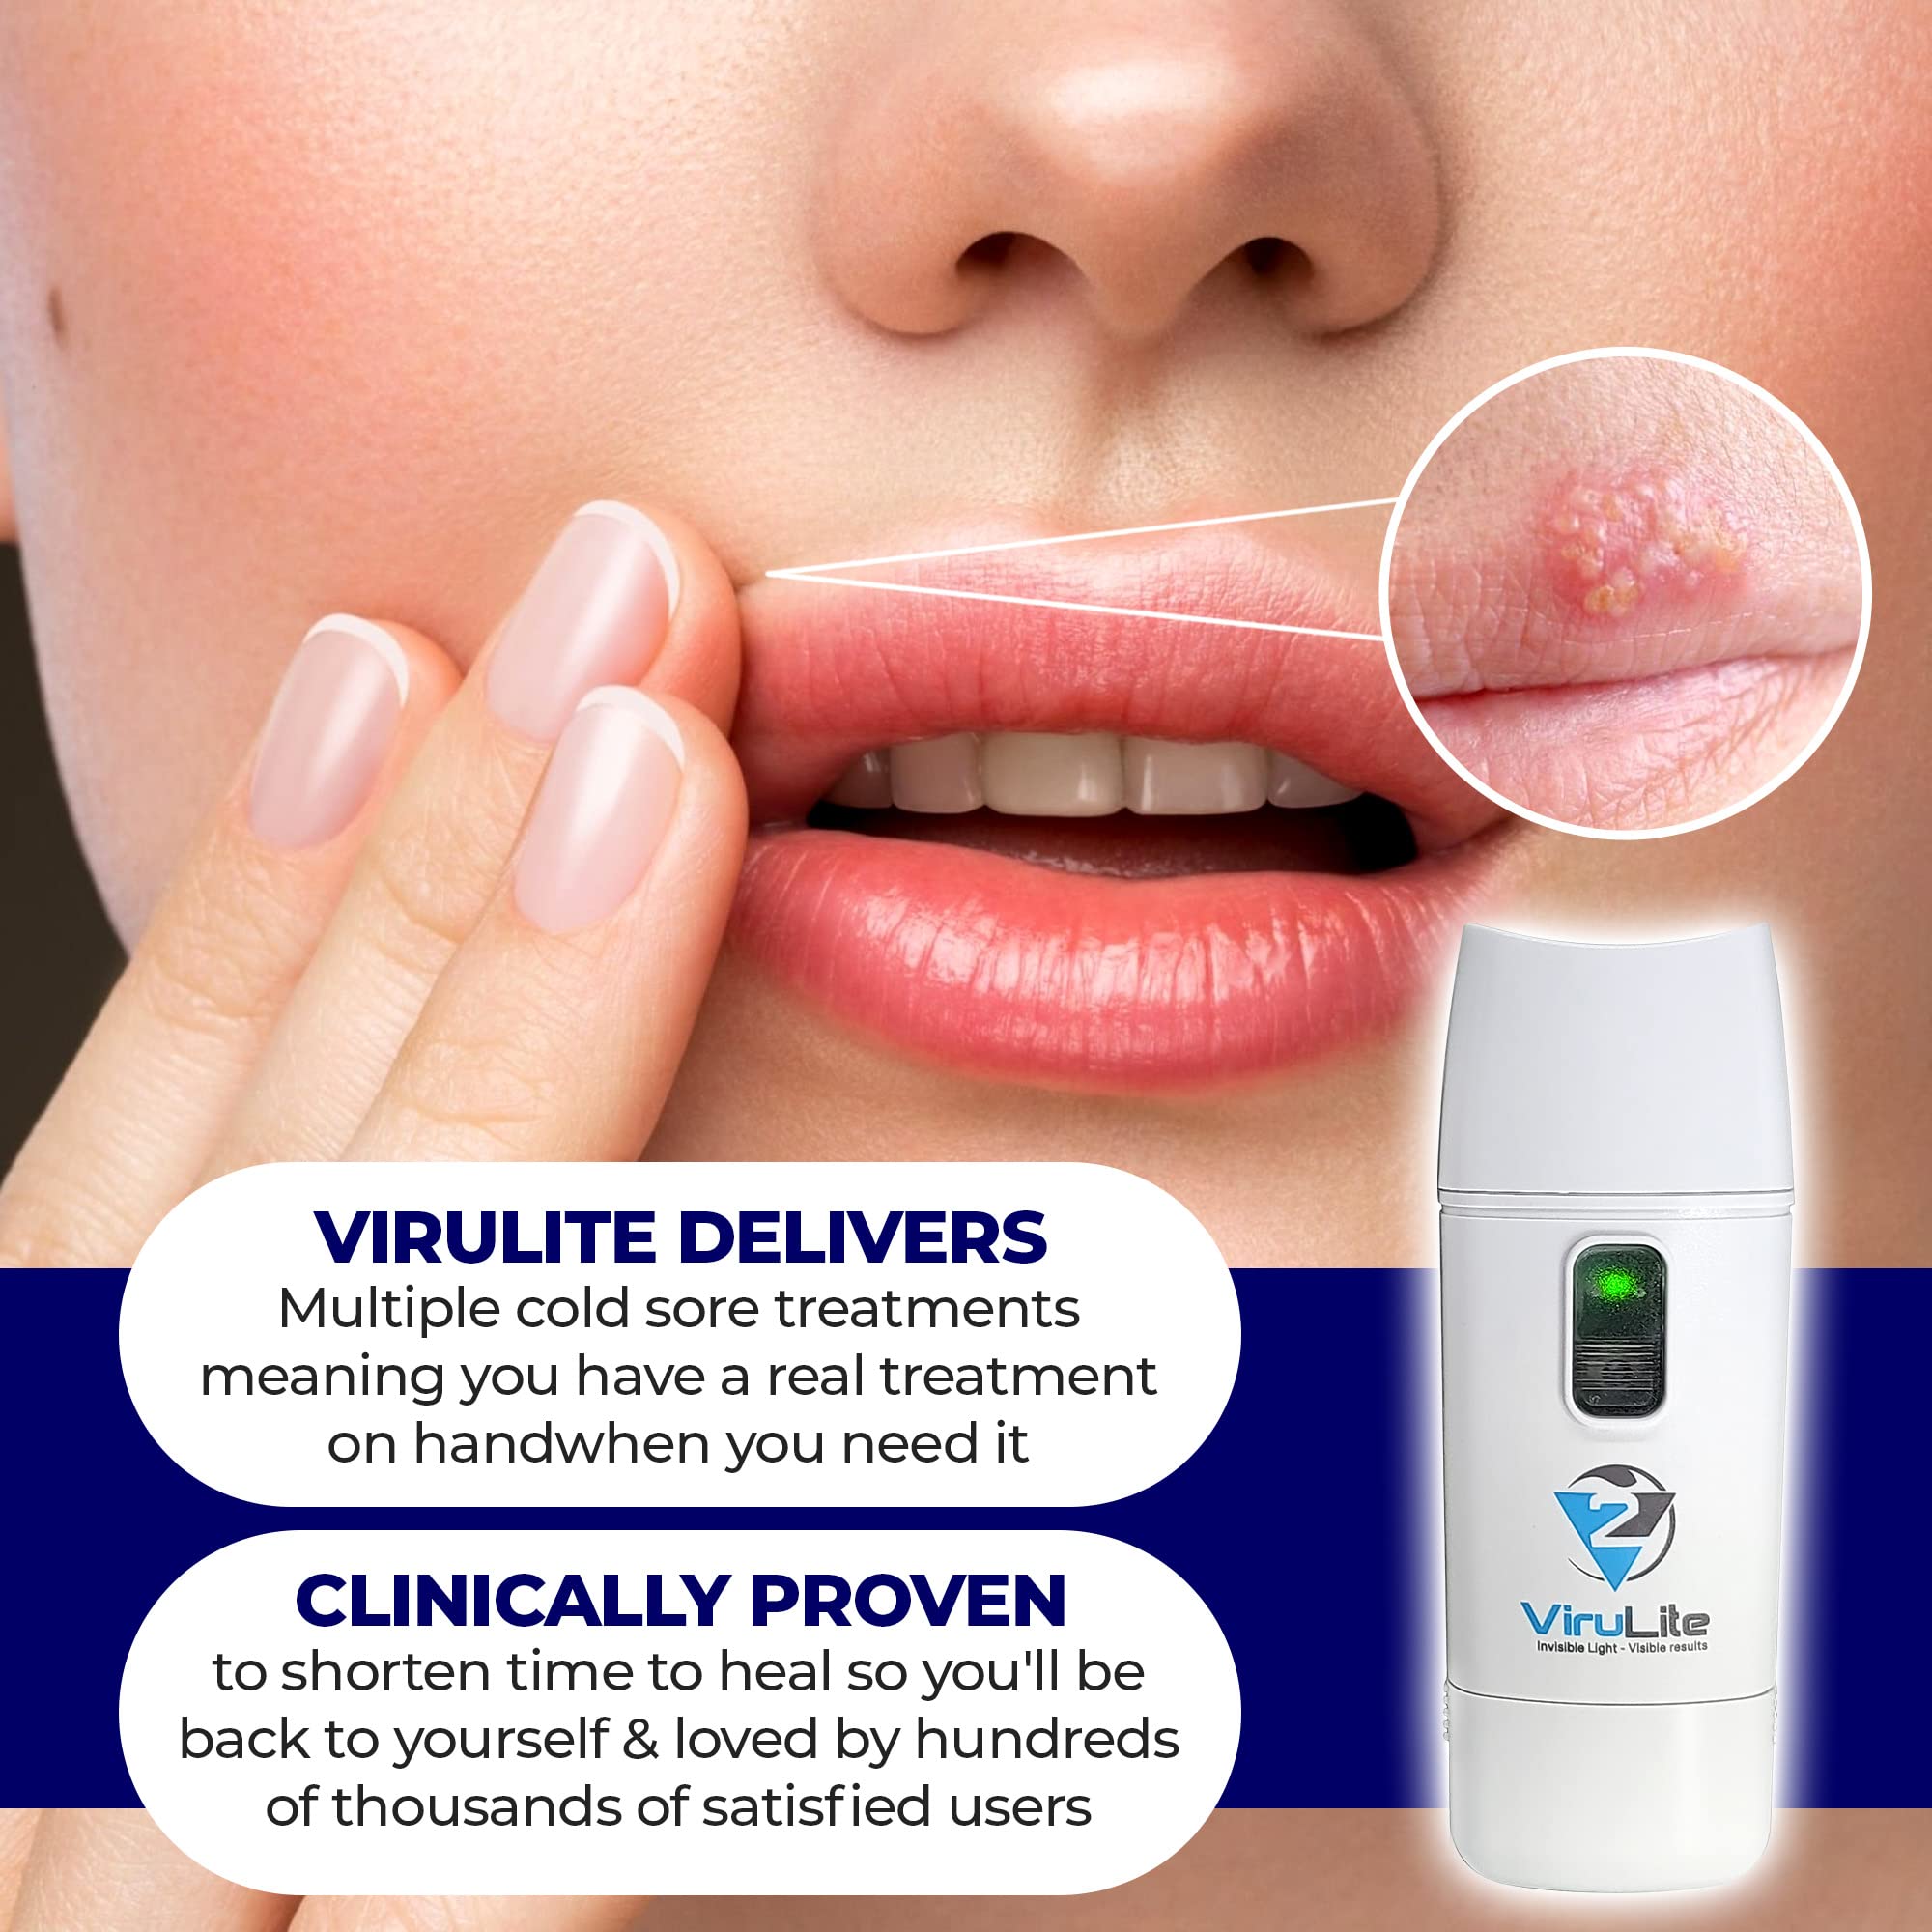 Virulite CS 2.0 Treats Unlimited Outbreaks The First & Only FDA Cleared Mutli-Patented Device for The Treatment of Cold Sores Invisible Light - Visible Results